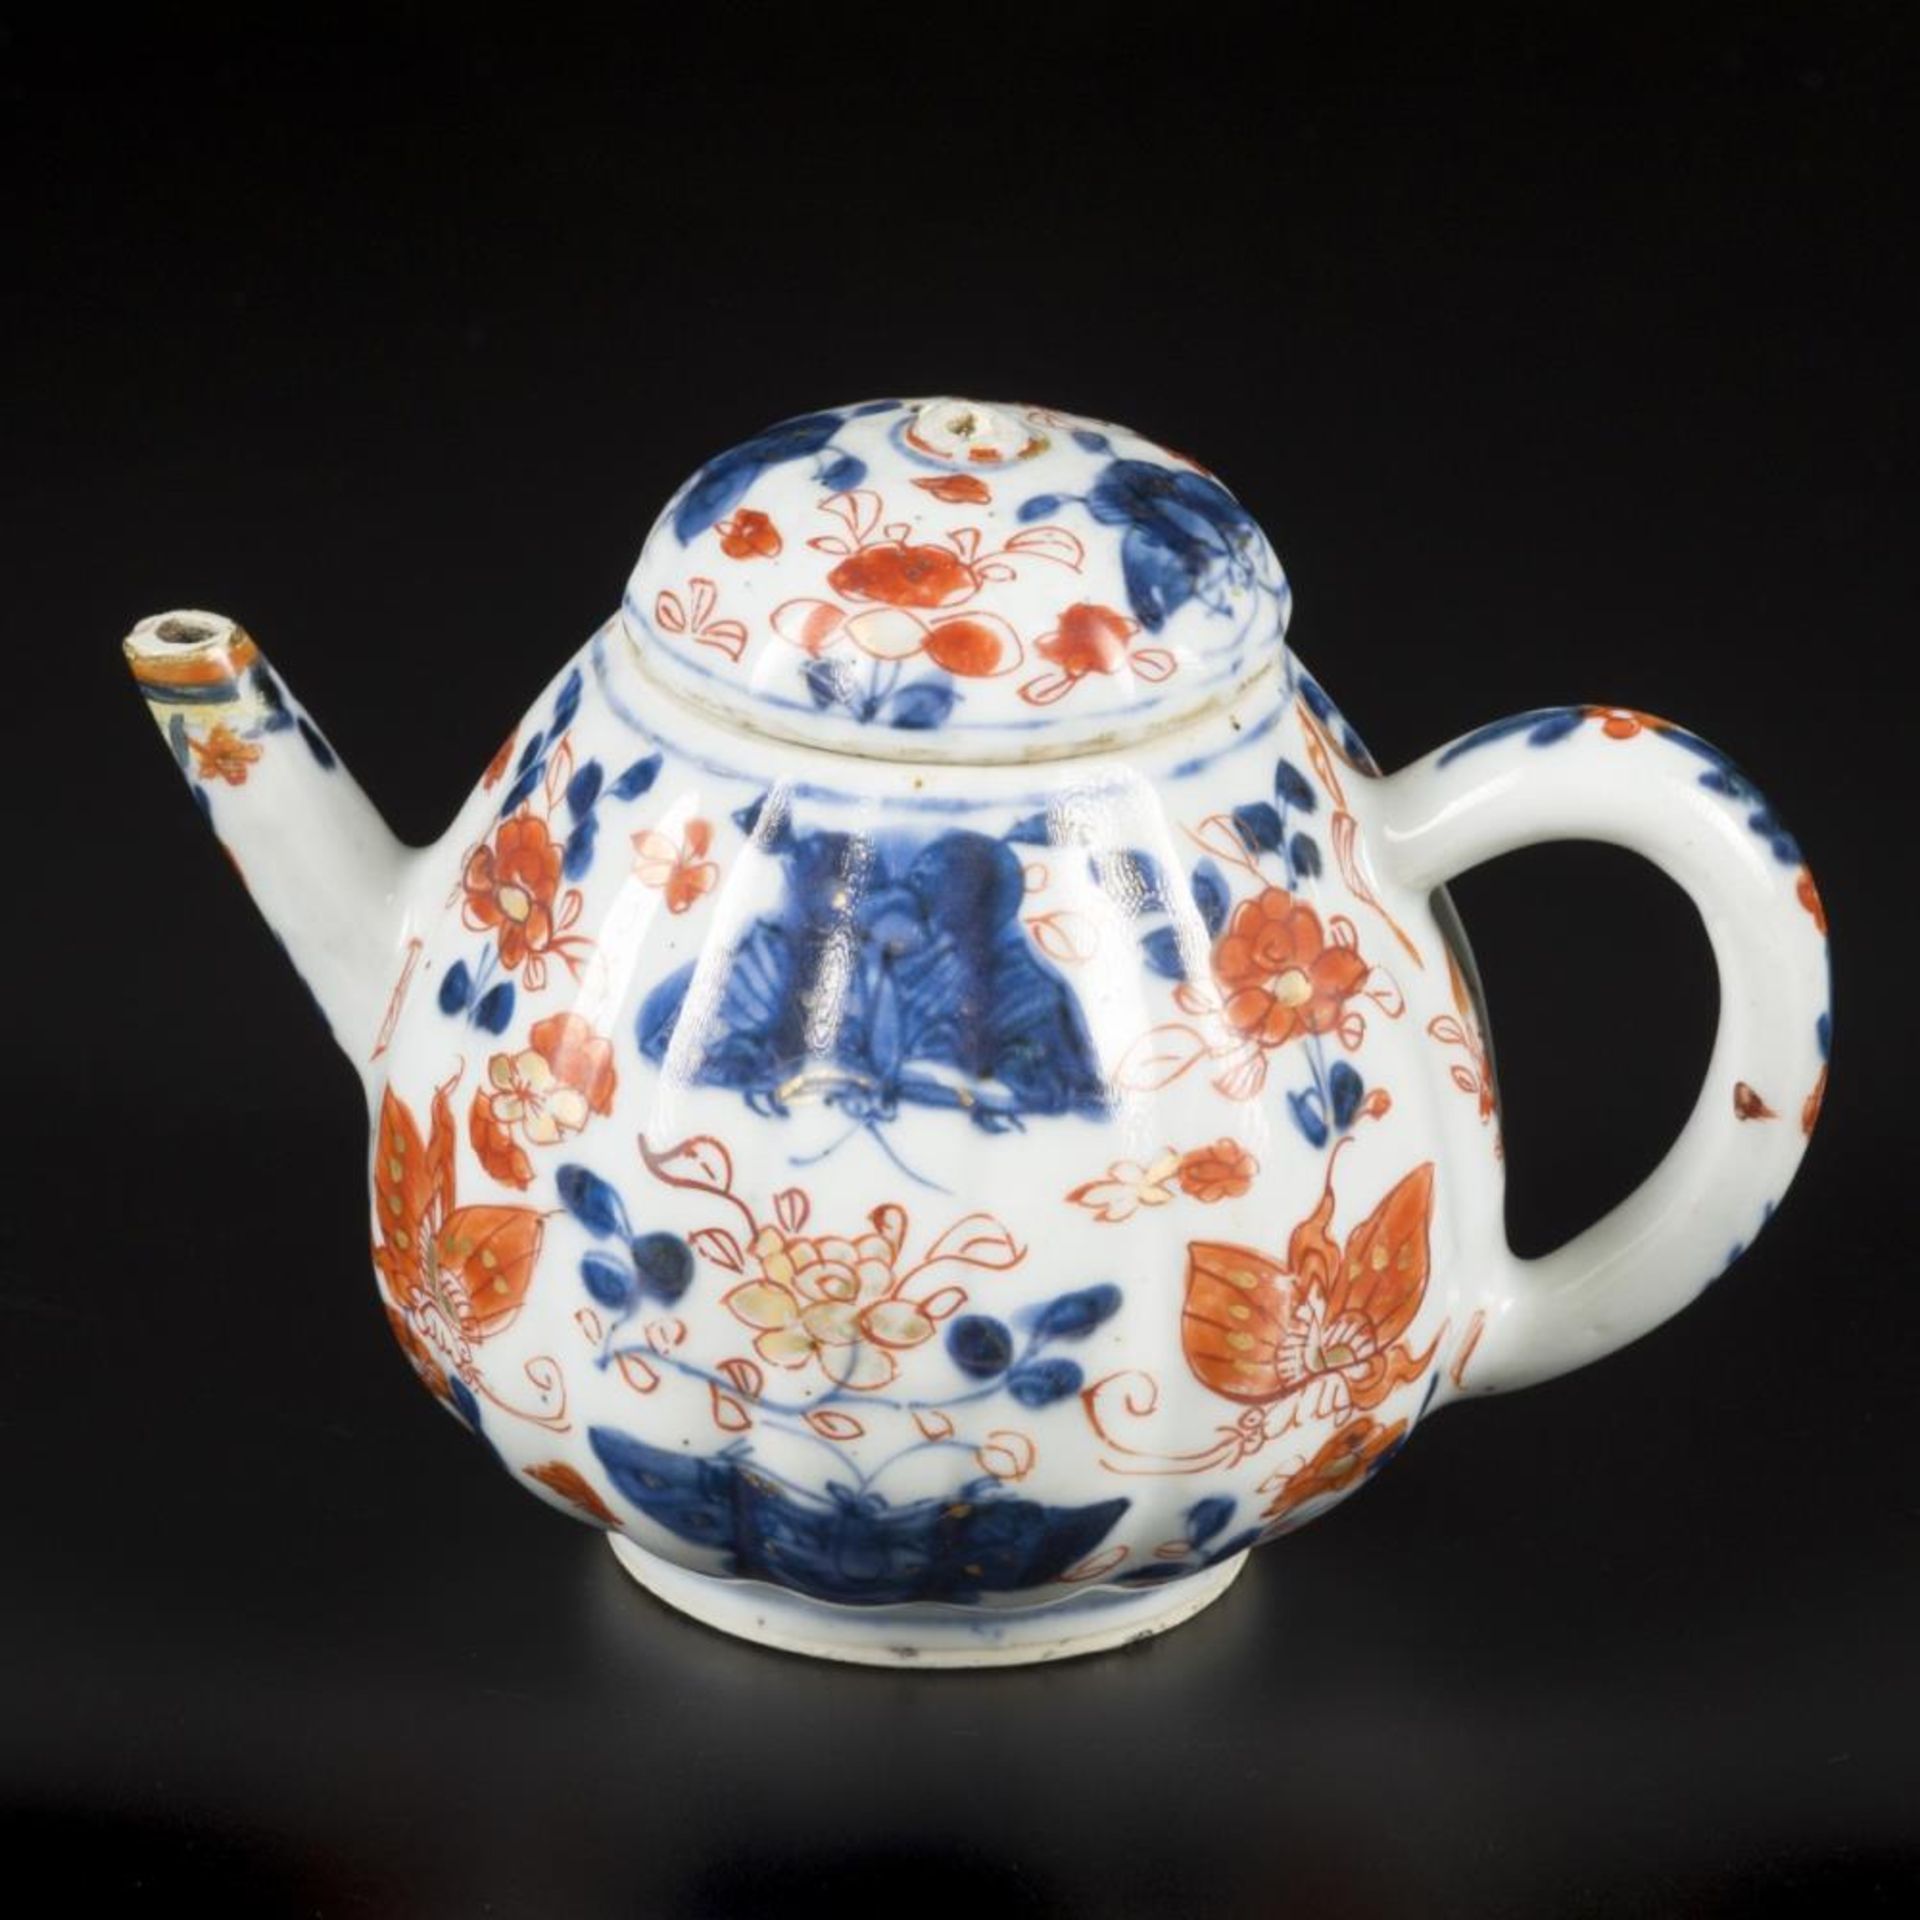 A lot of (2) porcelain teapots with Imari decoration. China, 18th century. - Image 7 of 12